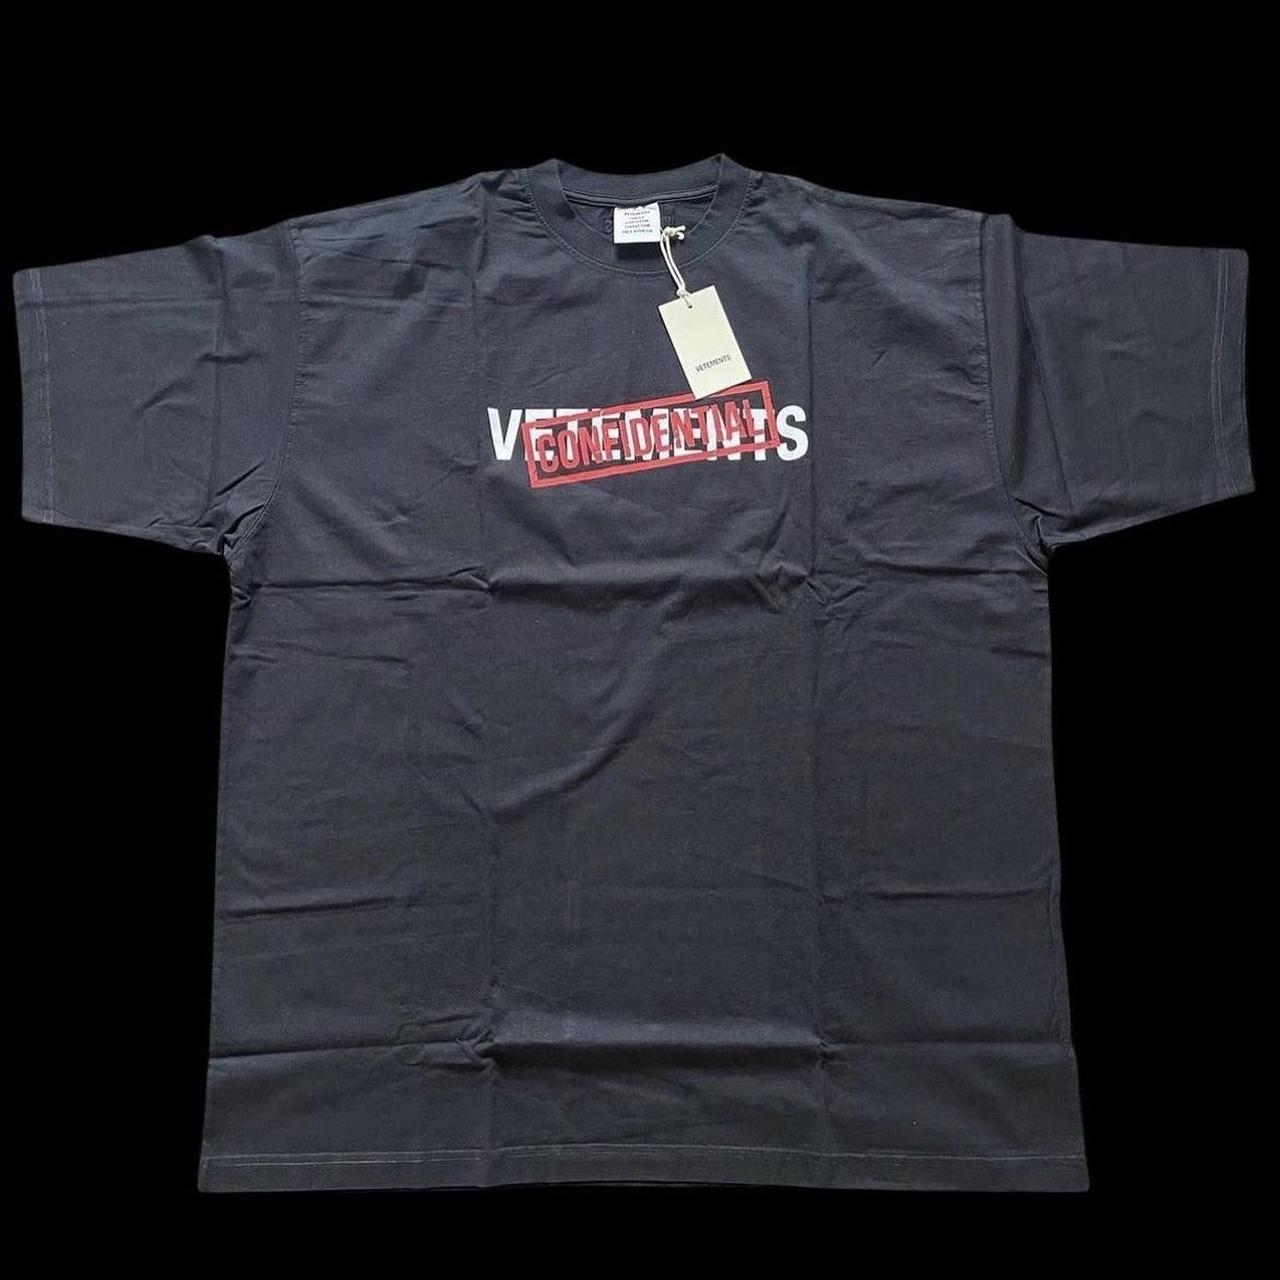 Vetements Confidential Tee Size S fits like M - Depop